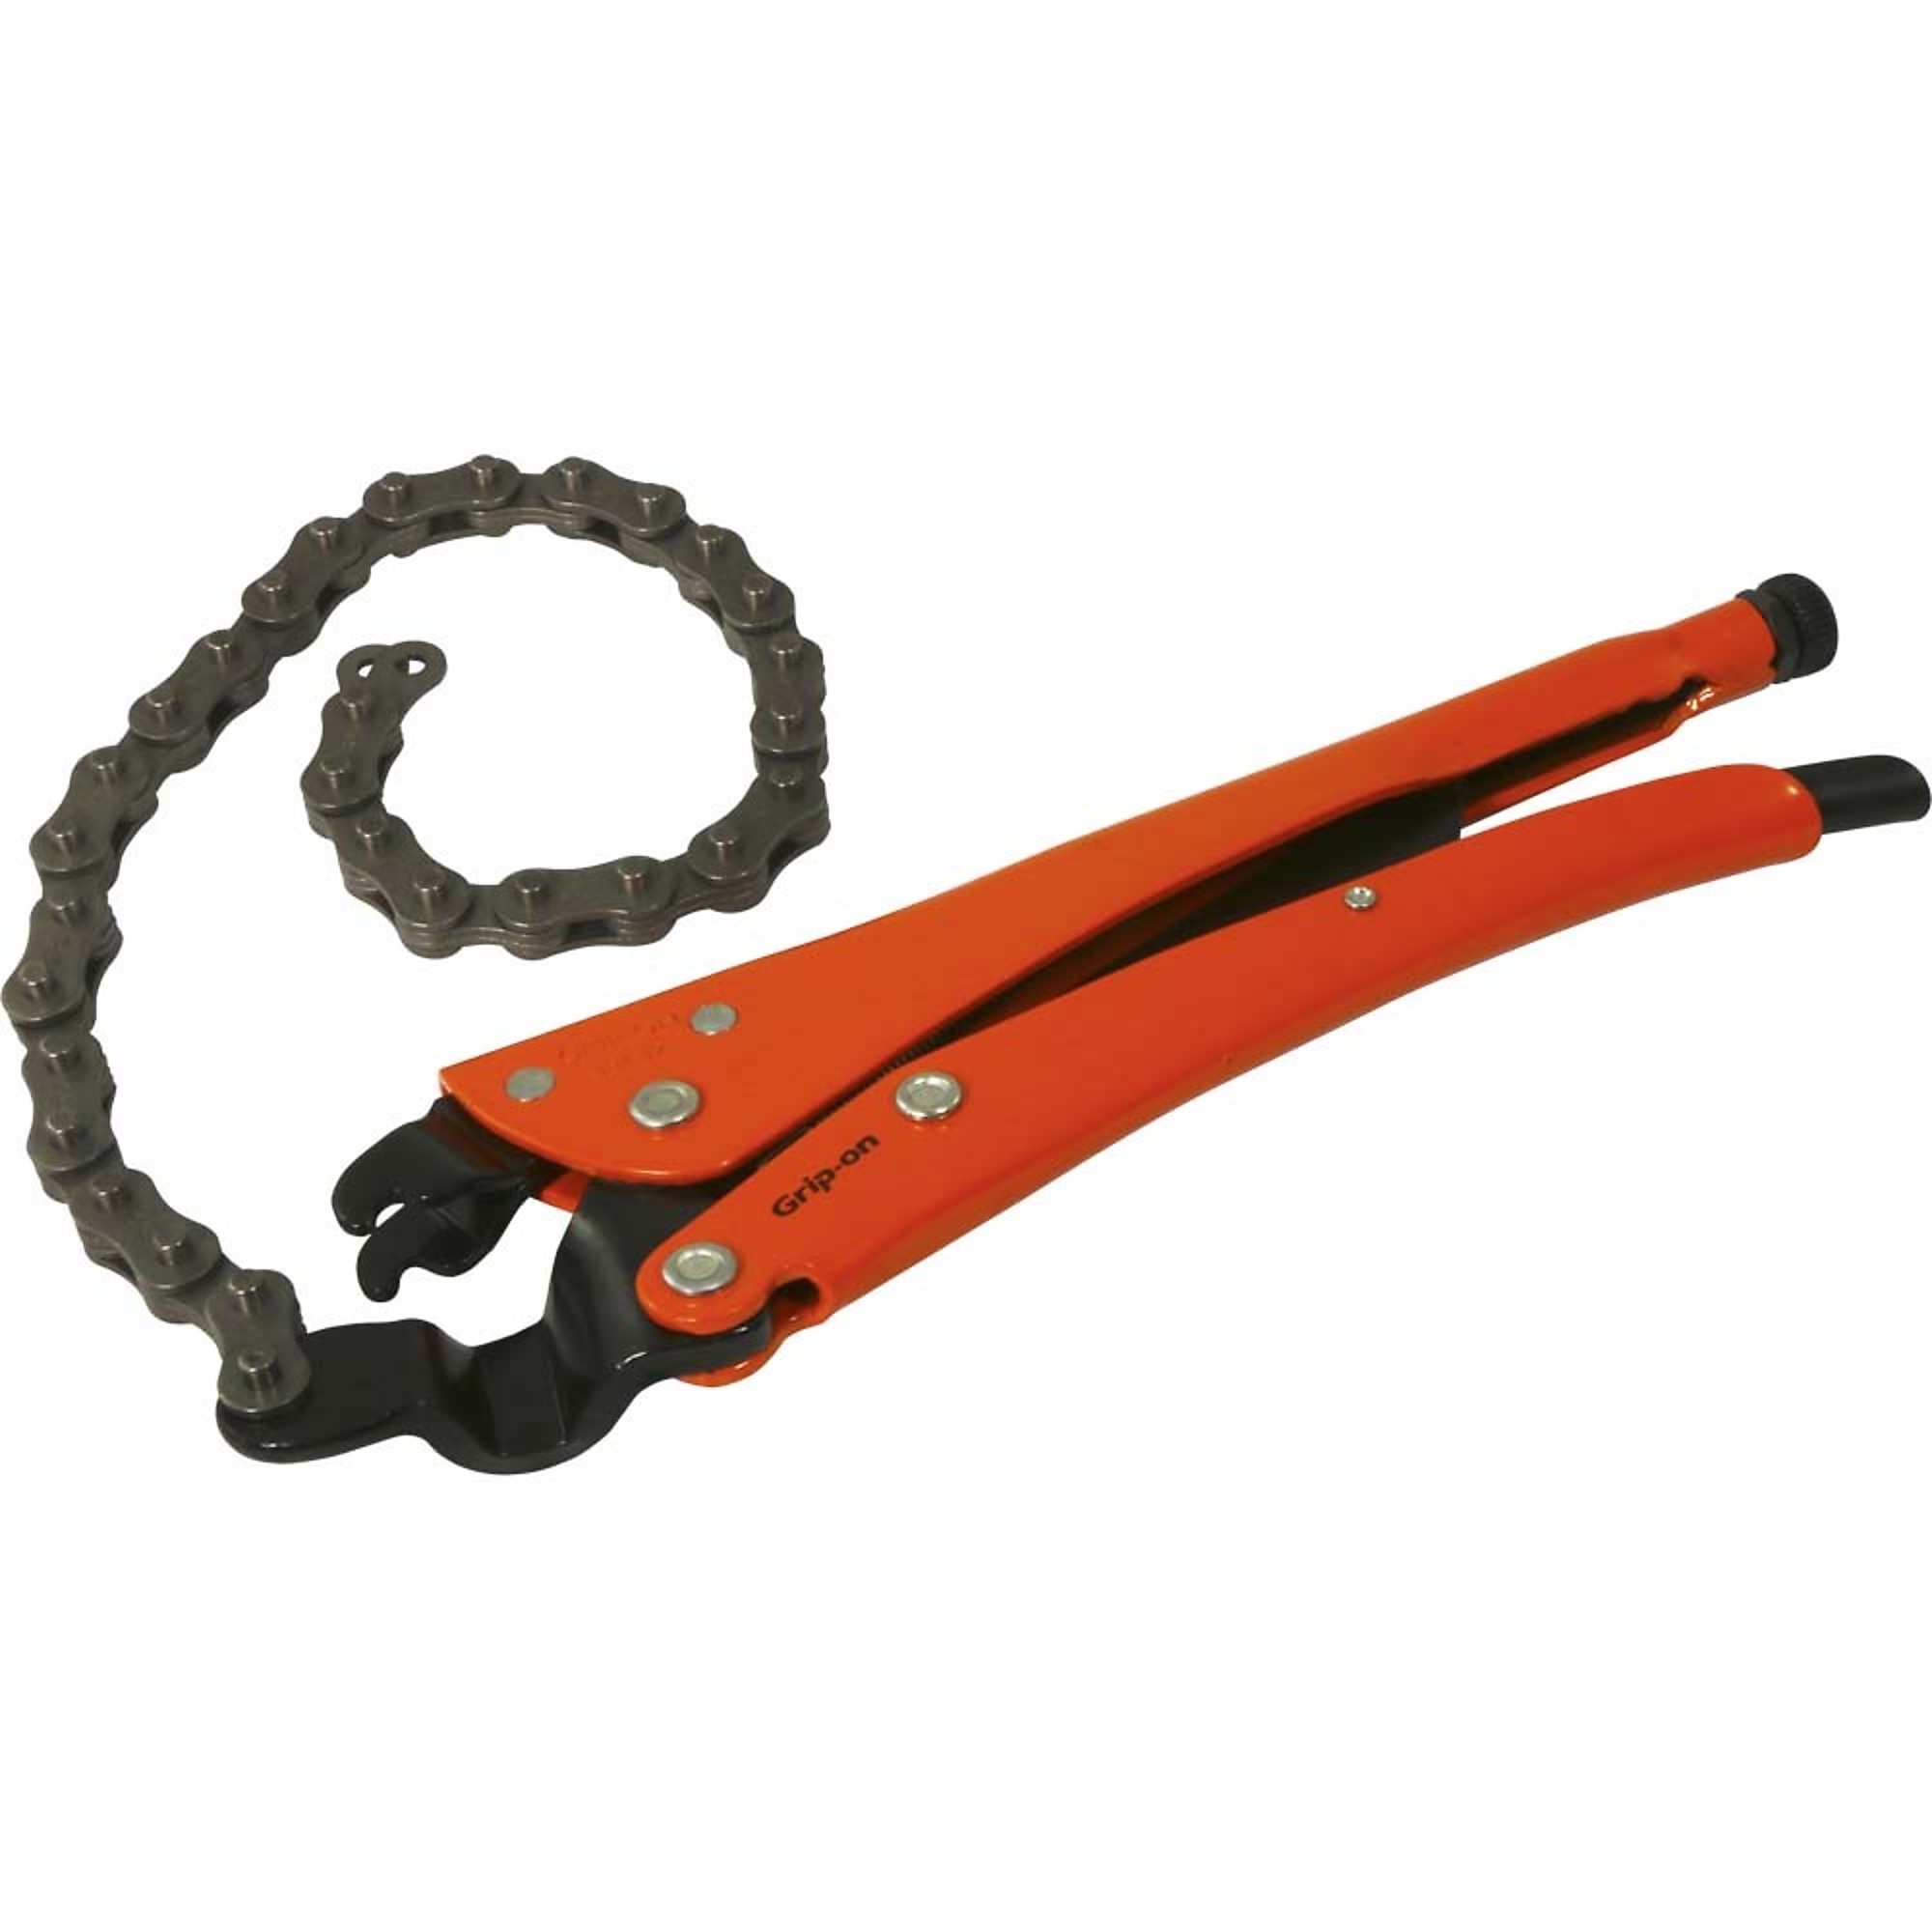 Grip-on, 12Inch Locking Chain Clamp, 6-1/4Inch Jaw Opening, Pieces (qty.) 1 Material Alloy Steel, Jaw Capacity 6.3 in, Model 181-12